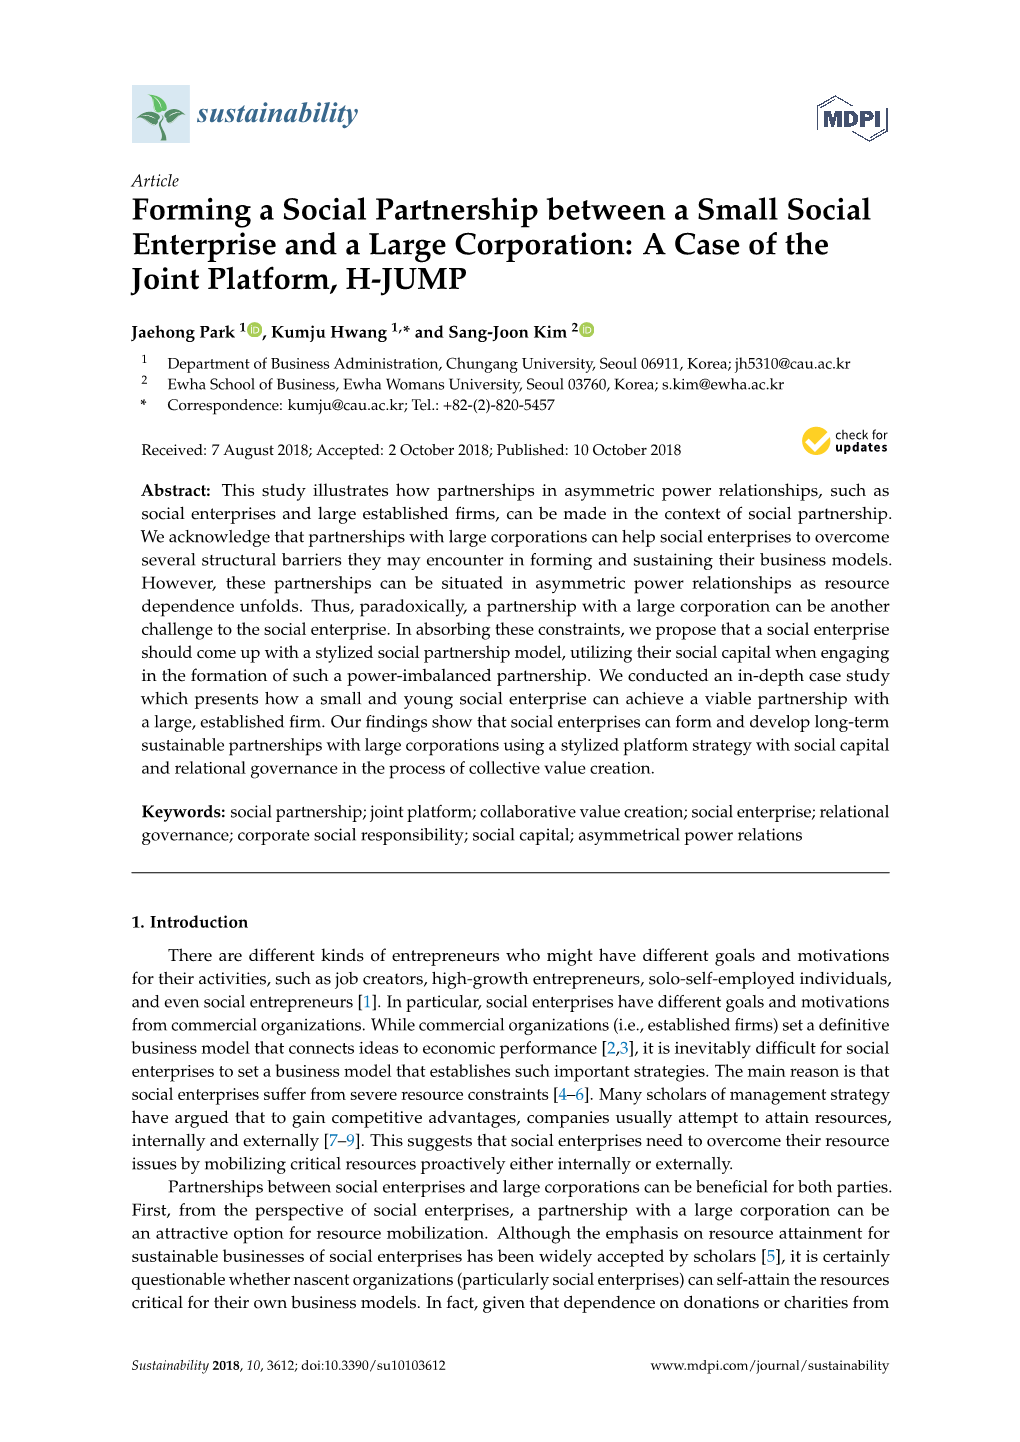 Forming a Social Partnership Between a Small Social Enterprise and a Large Corporation: a Case of the Joint Platform, H-JUMP